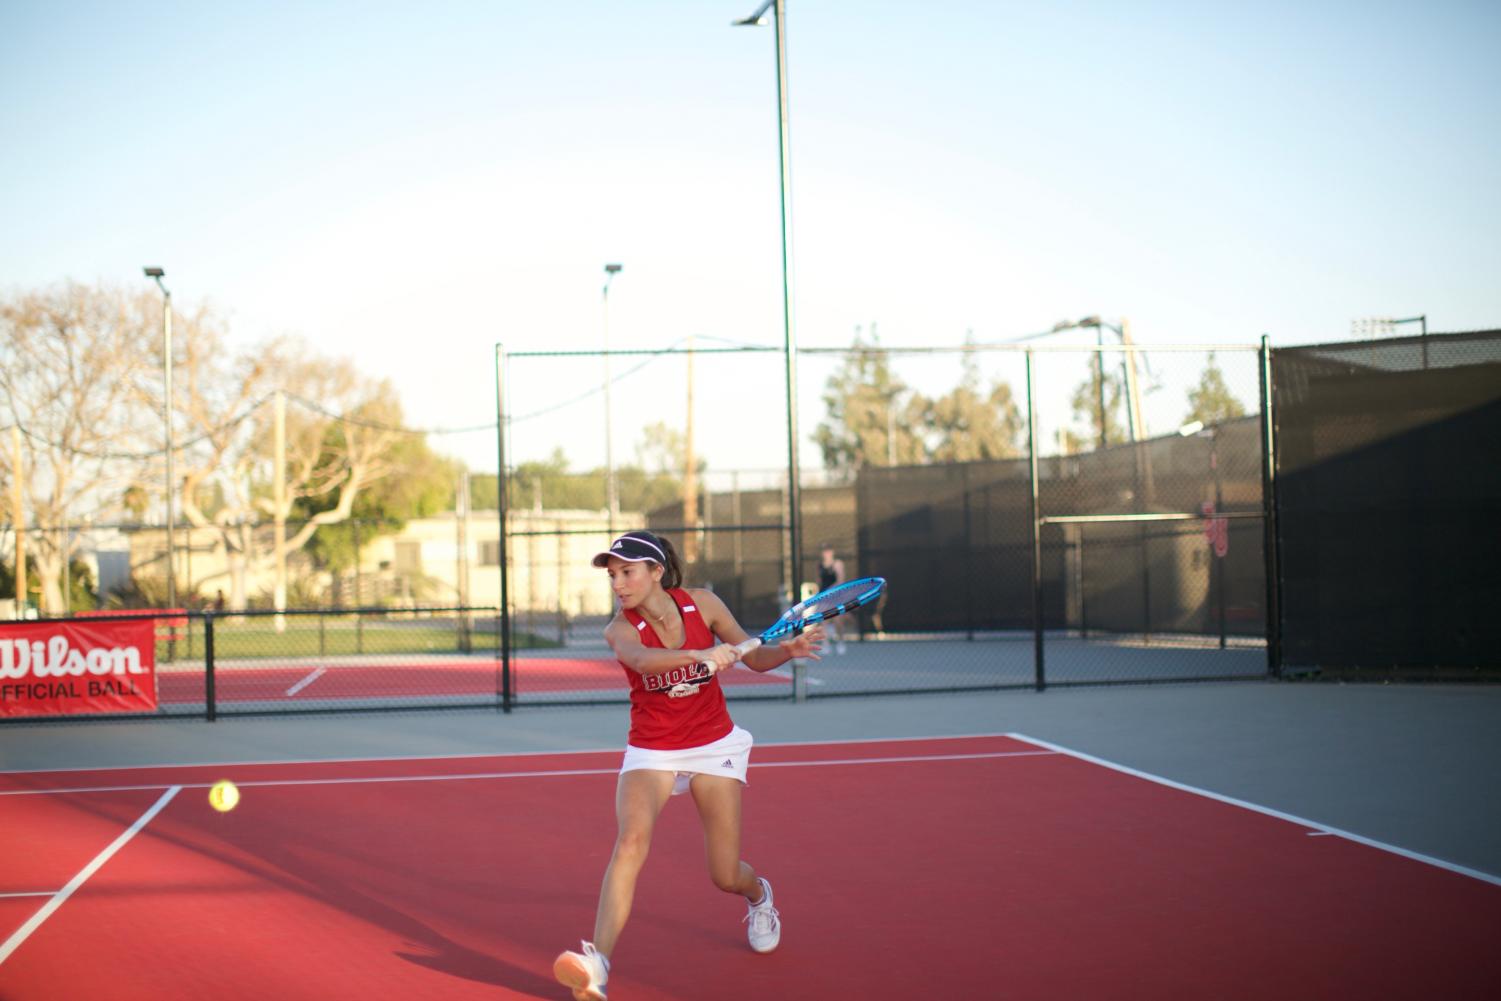 Women’s tennis takes another tough loss